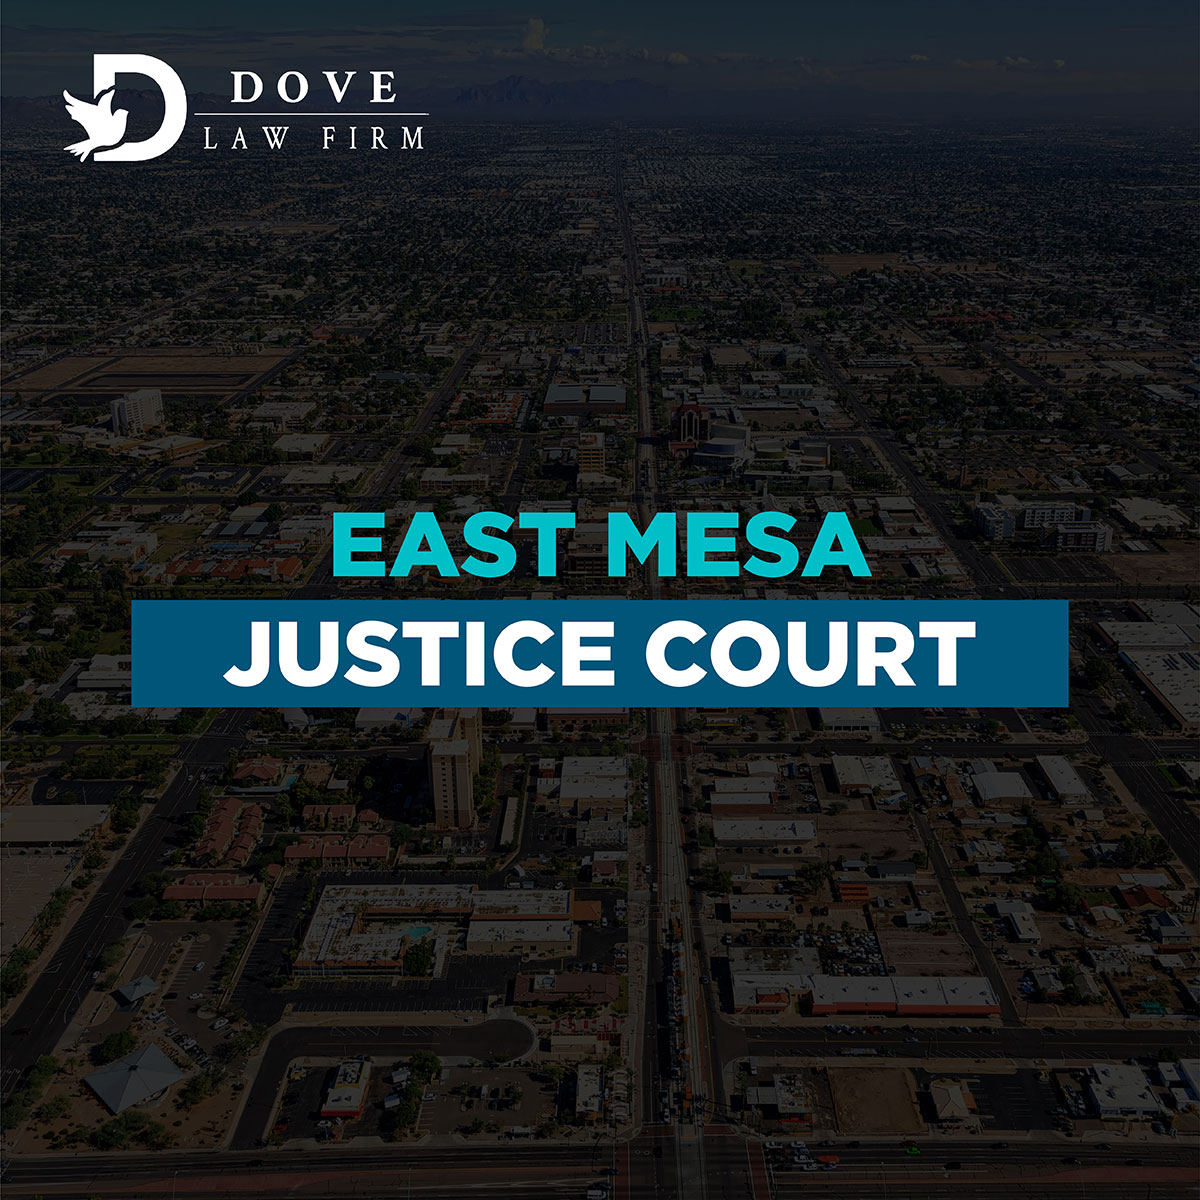 East mesa justice court